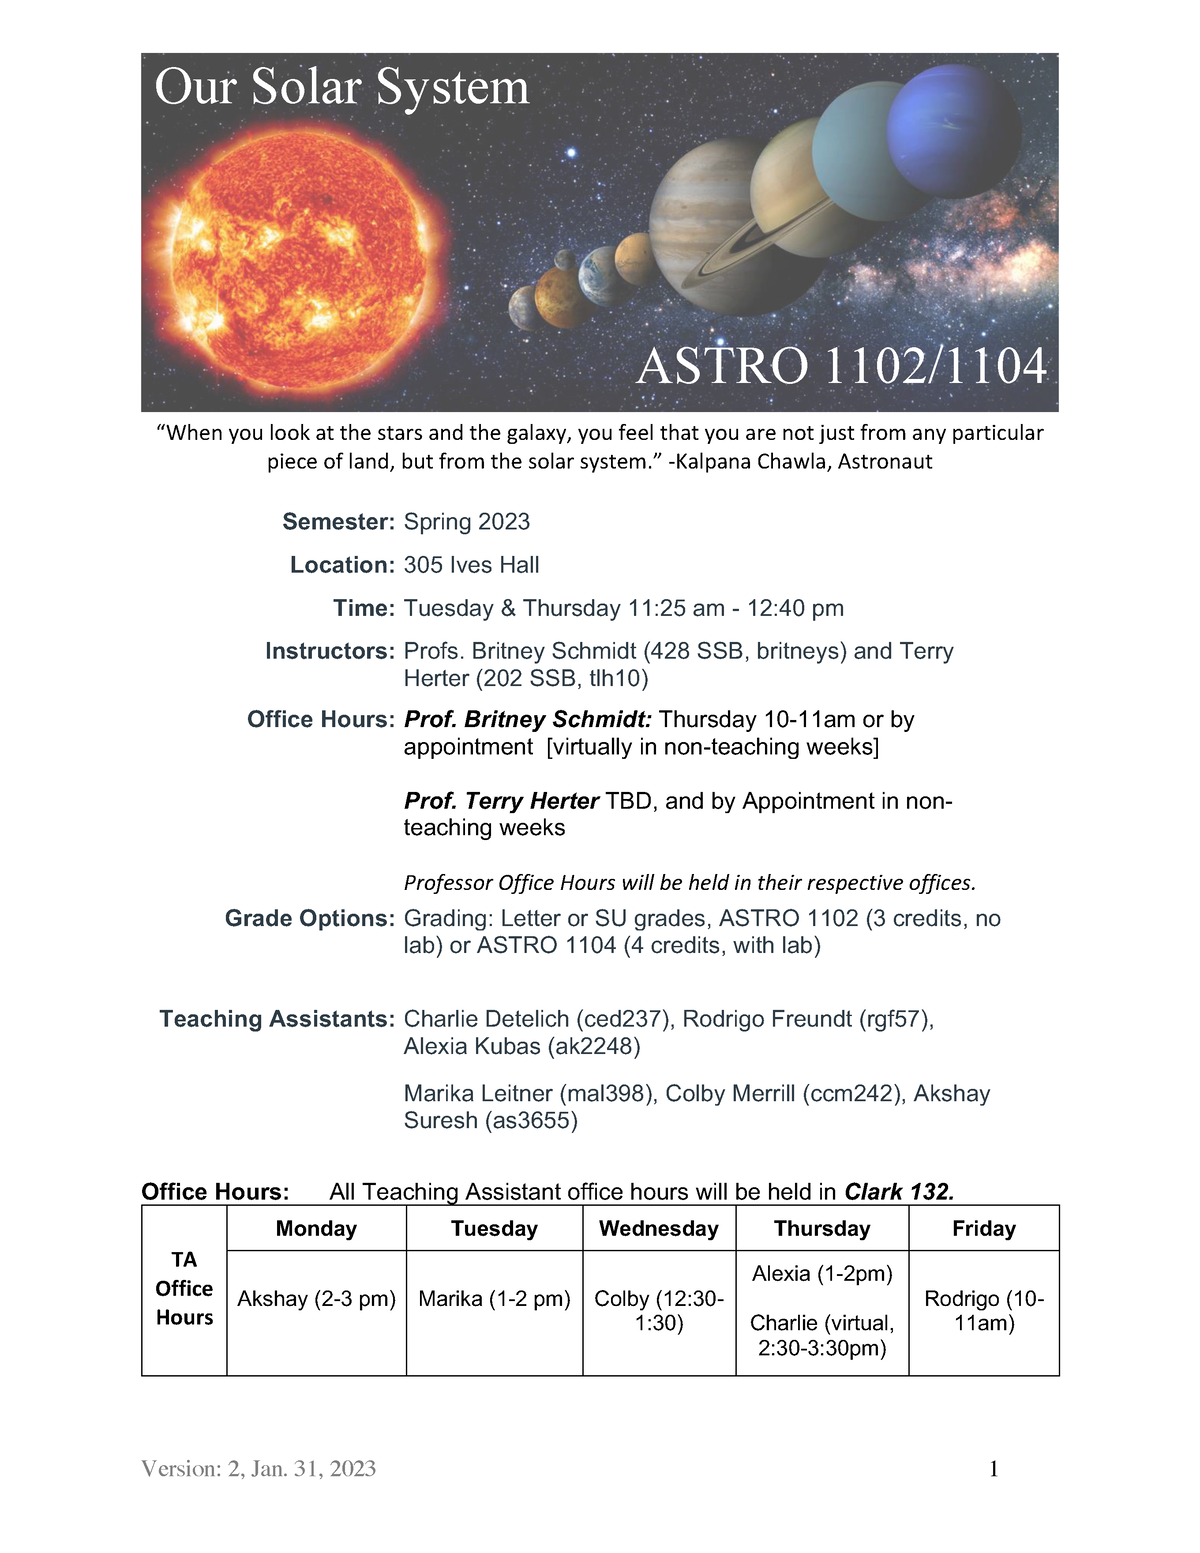 ASTRO 1102 Syllabus - Our Solar System ASTRO 1102/ “When you look at ...